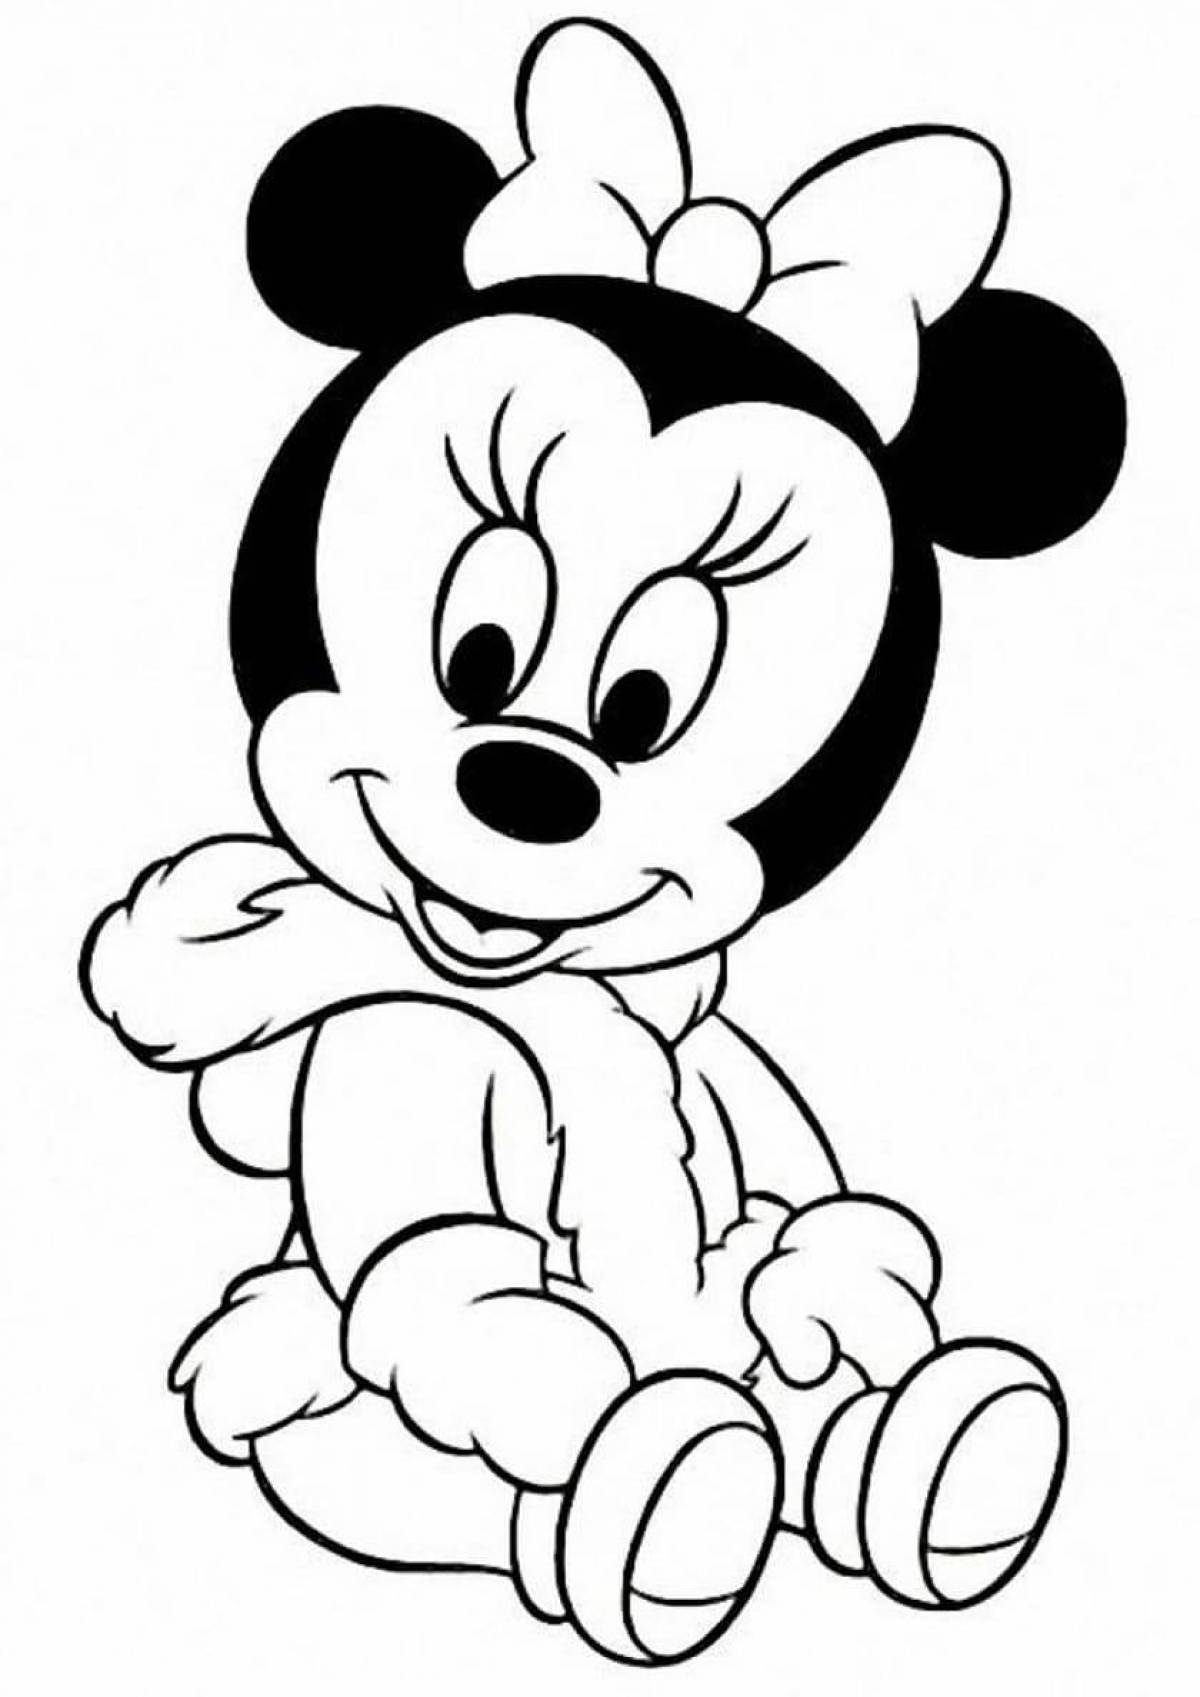 Giggly coloring page mickey mouse for girls